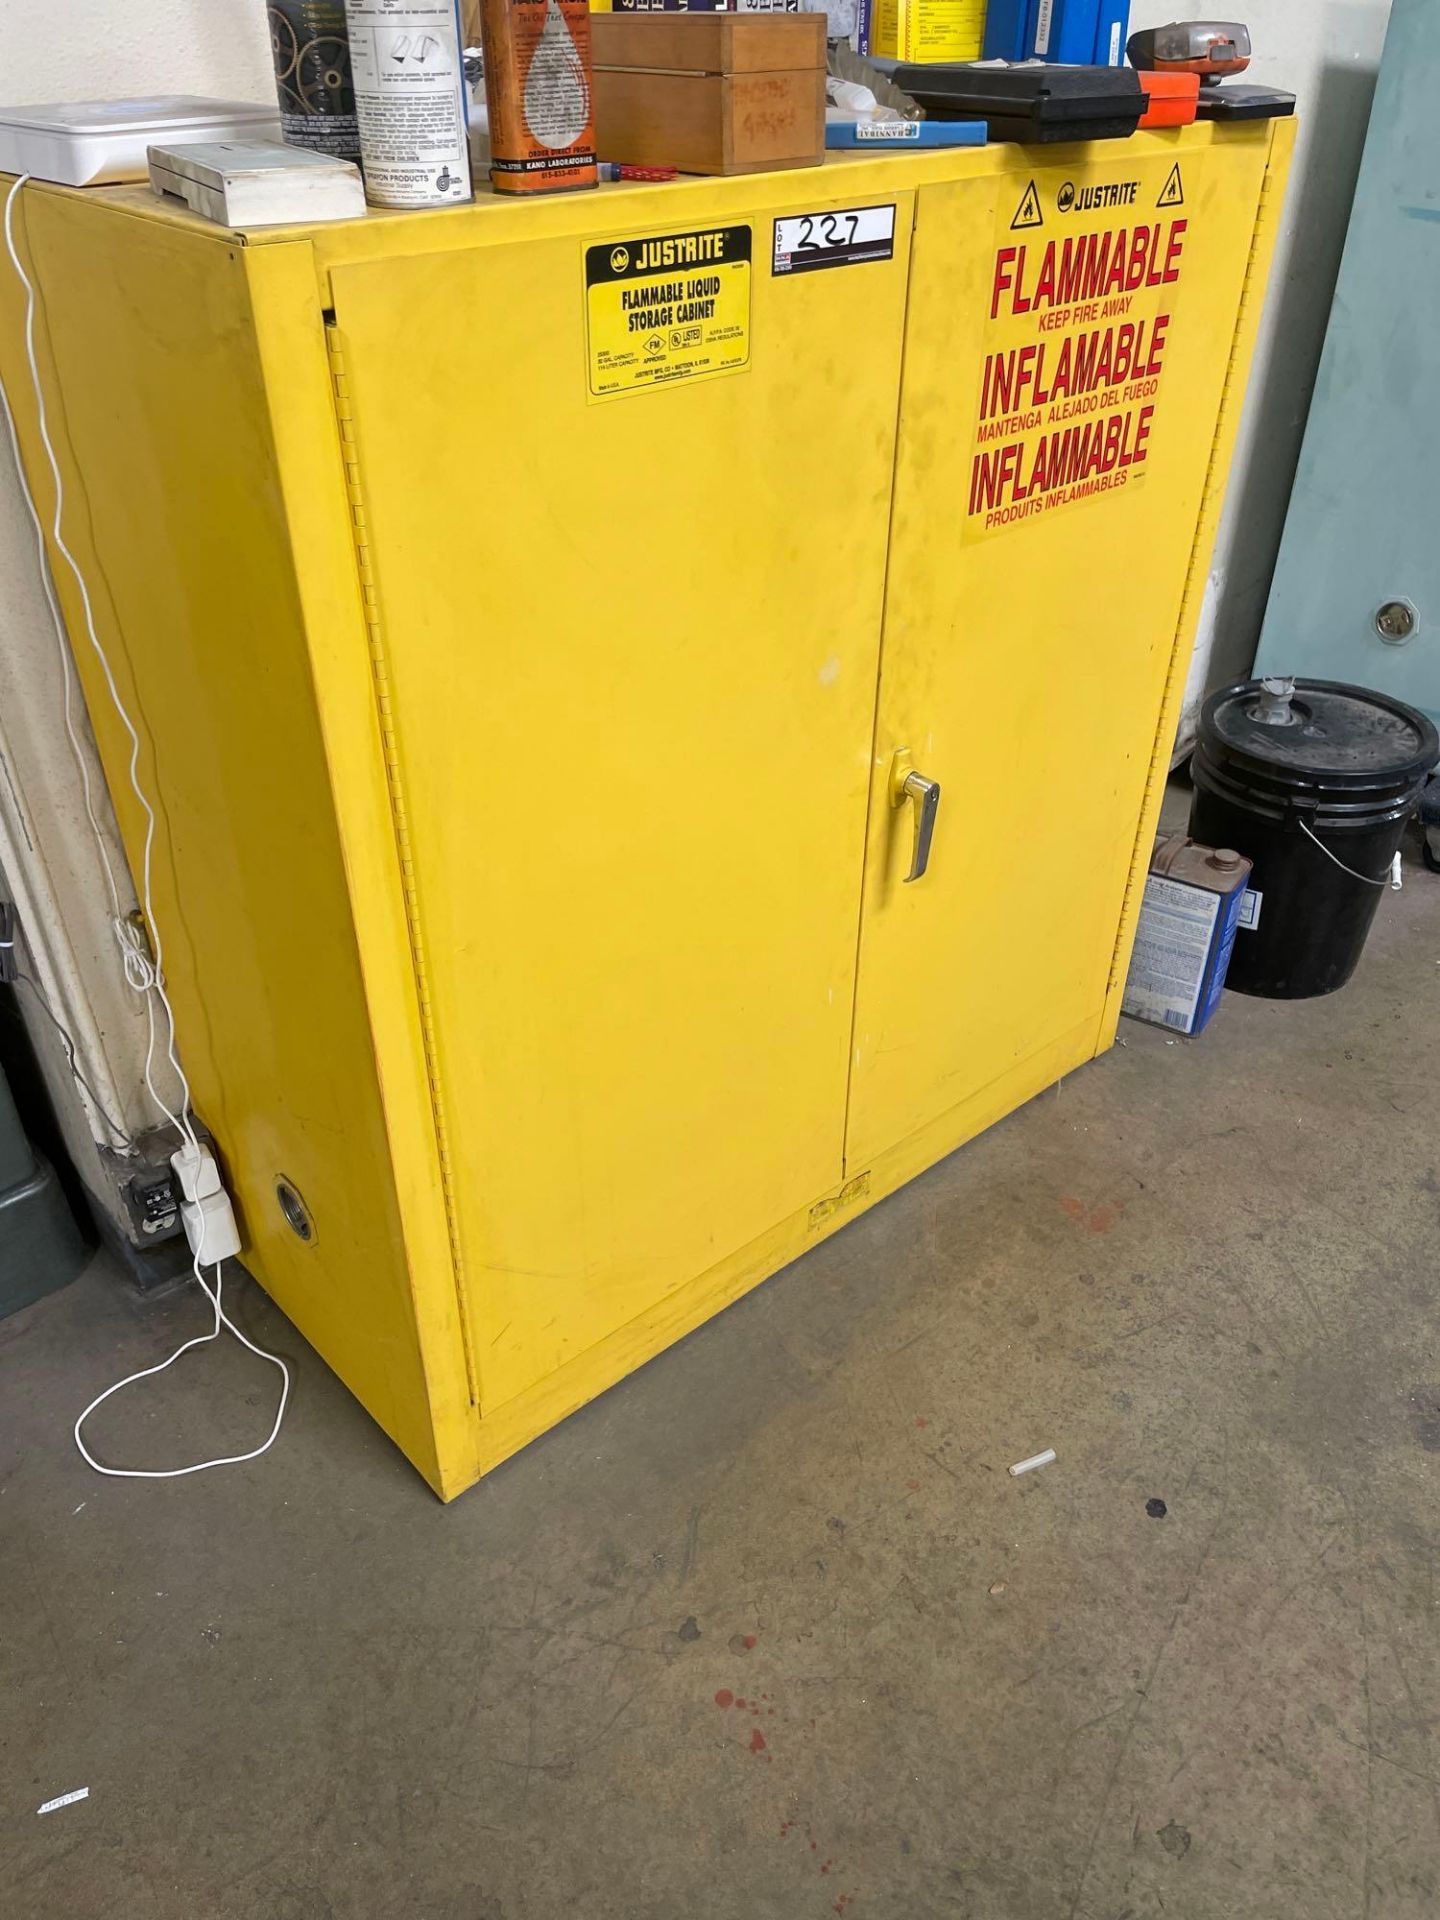 Just-Rite Flammable Liquid Storage Cabinet - Image 2 of 3